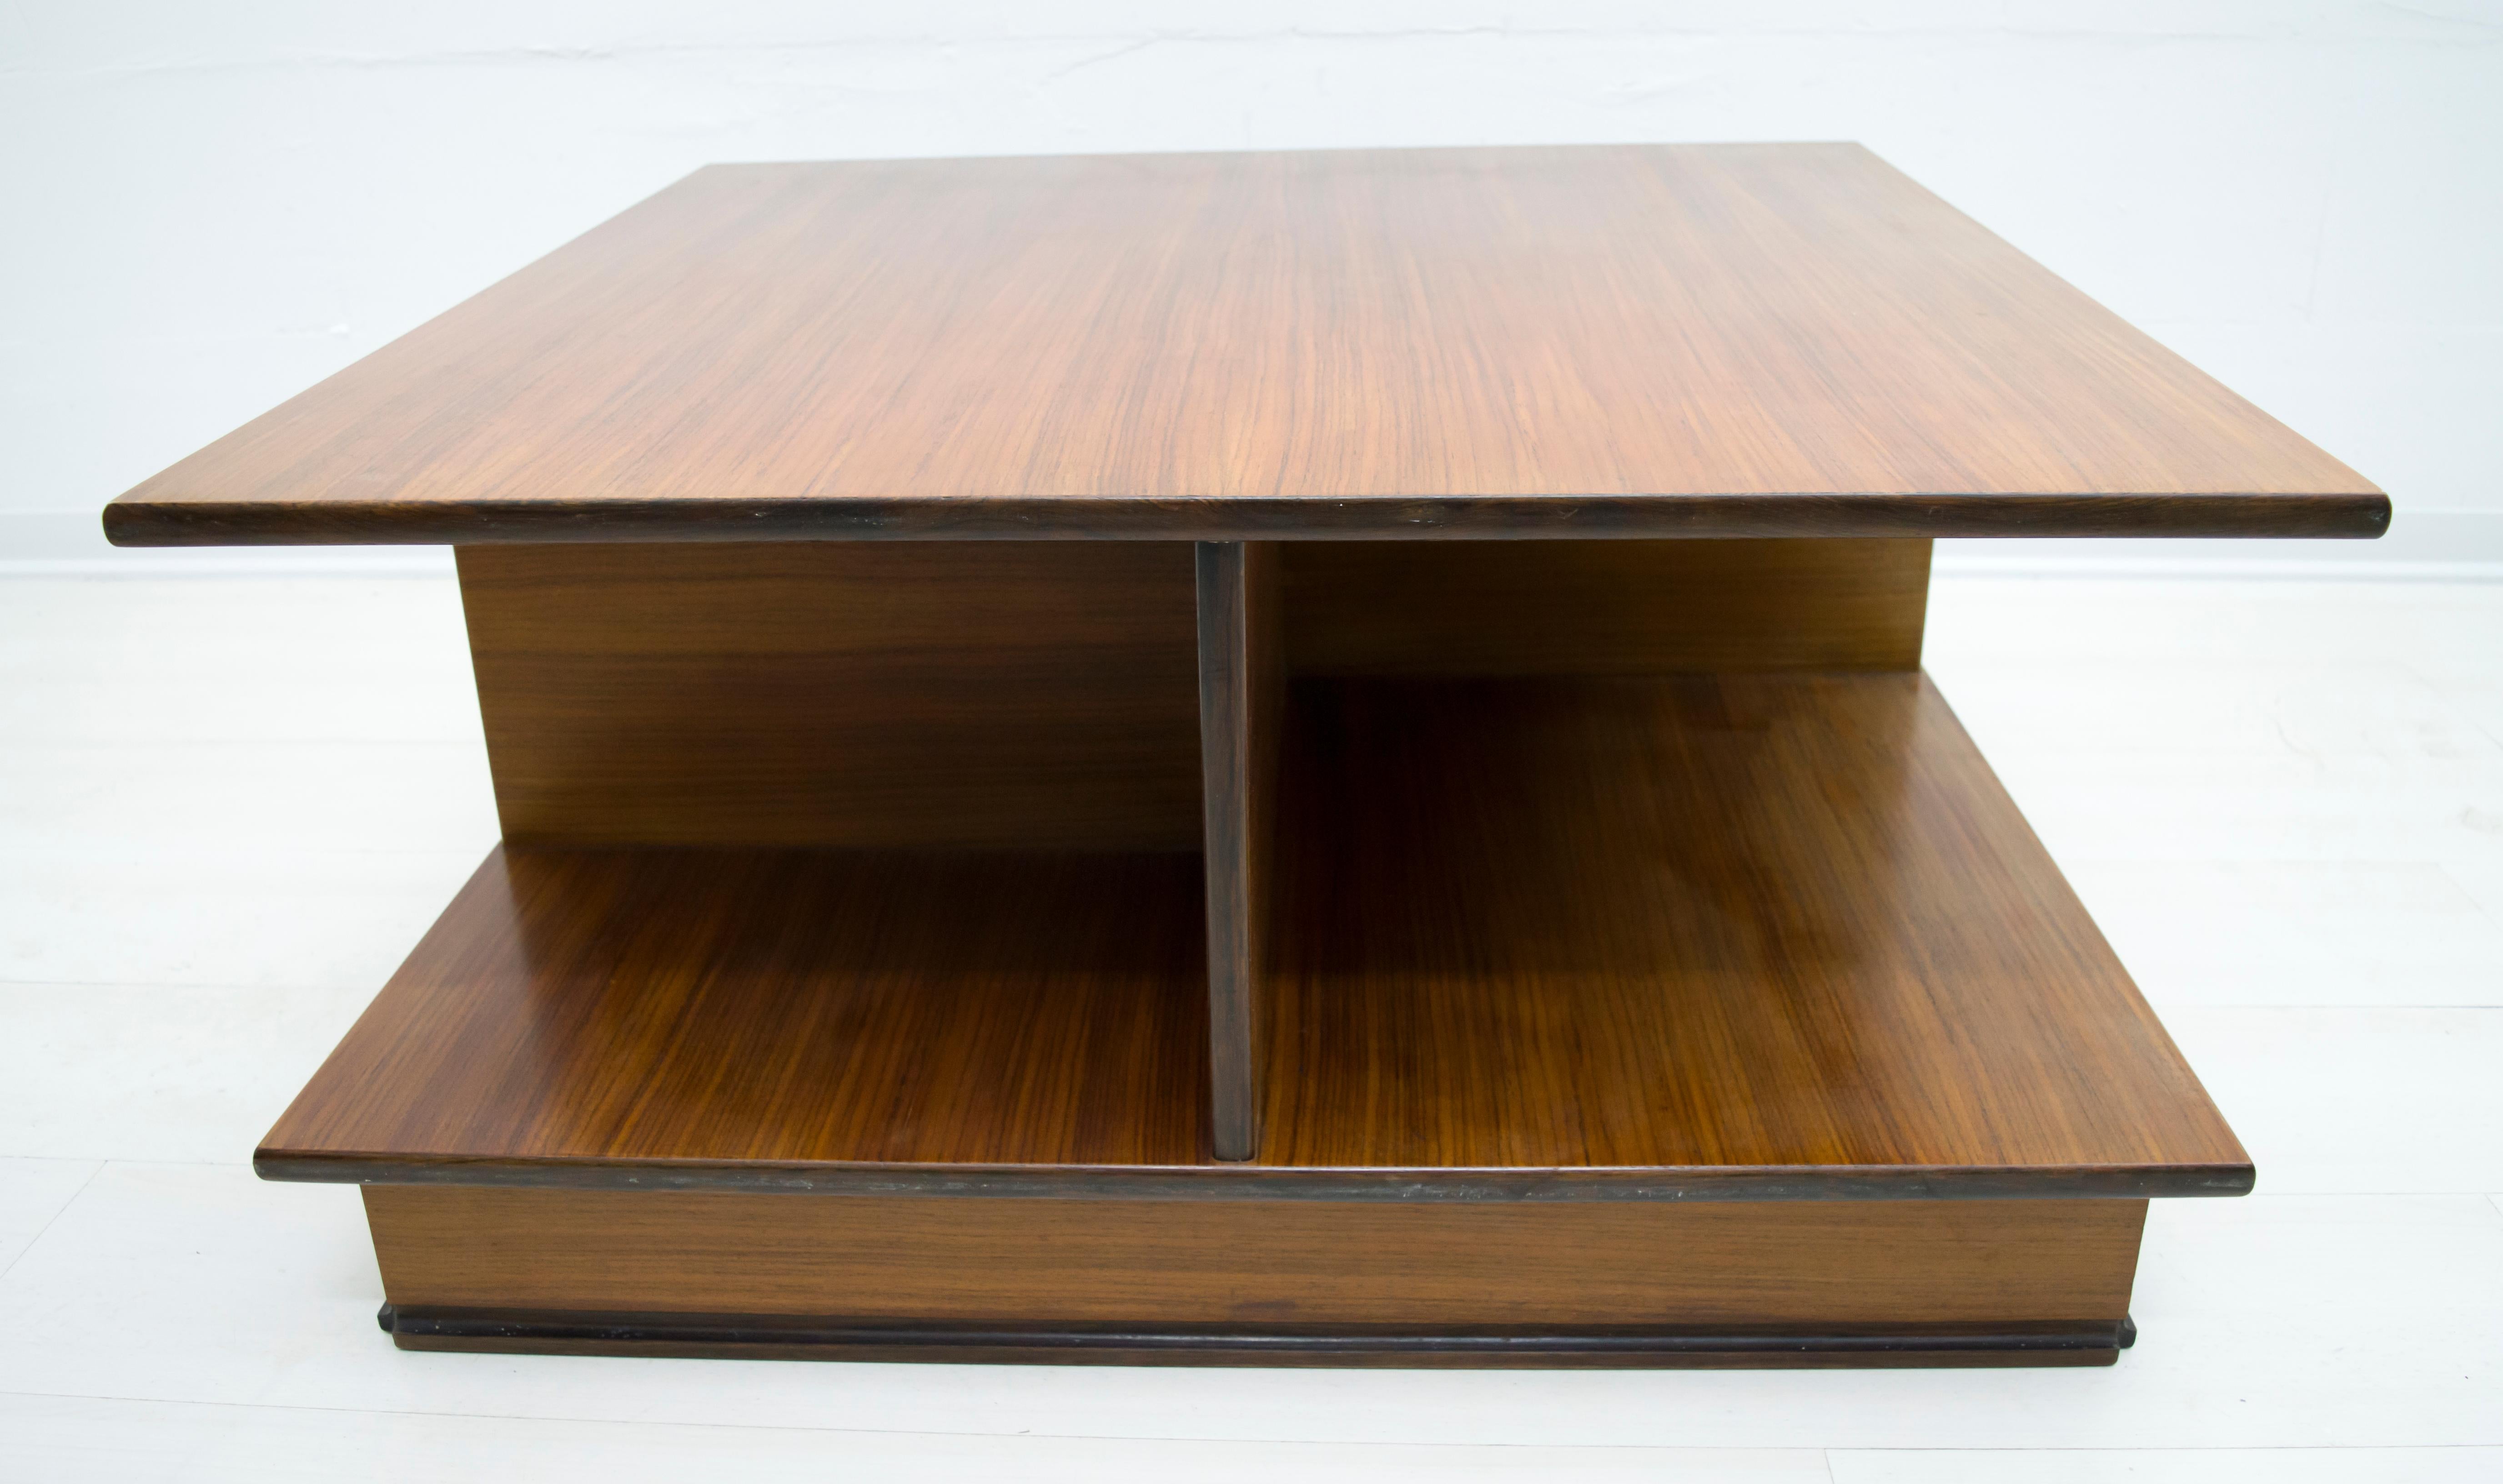 Walnut coffee table, produced by F.lli Saporiti in Besnate Italy, this model is patented.

